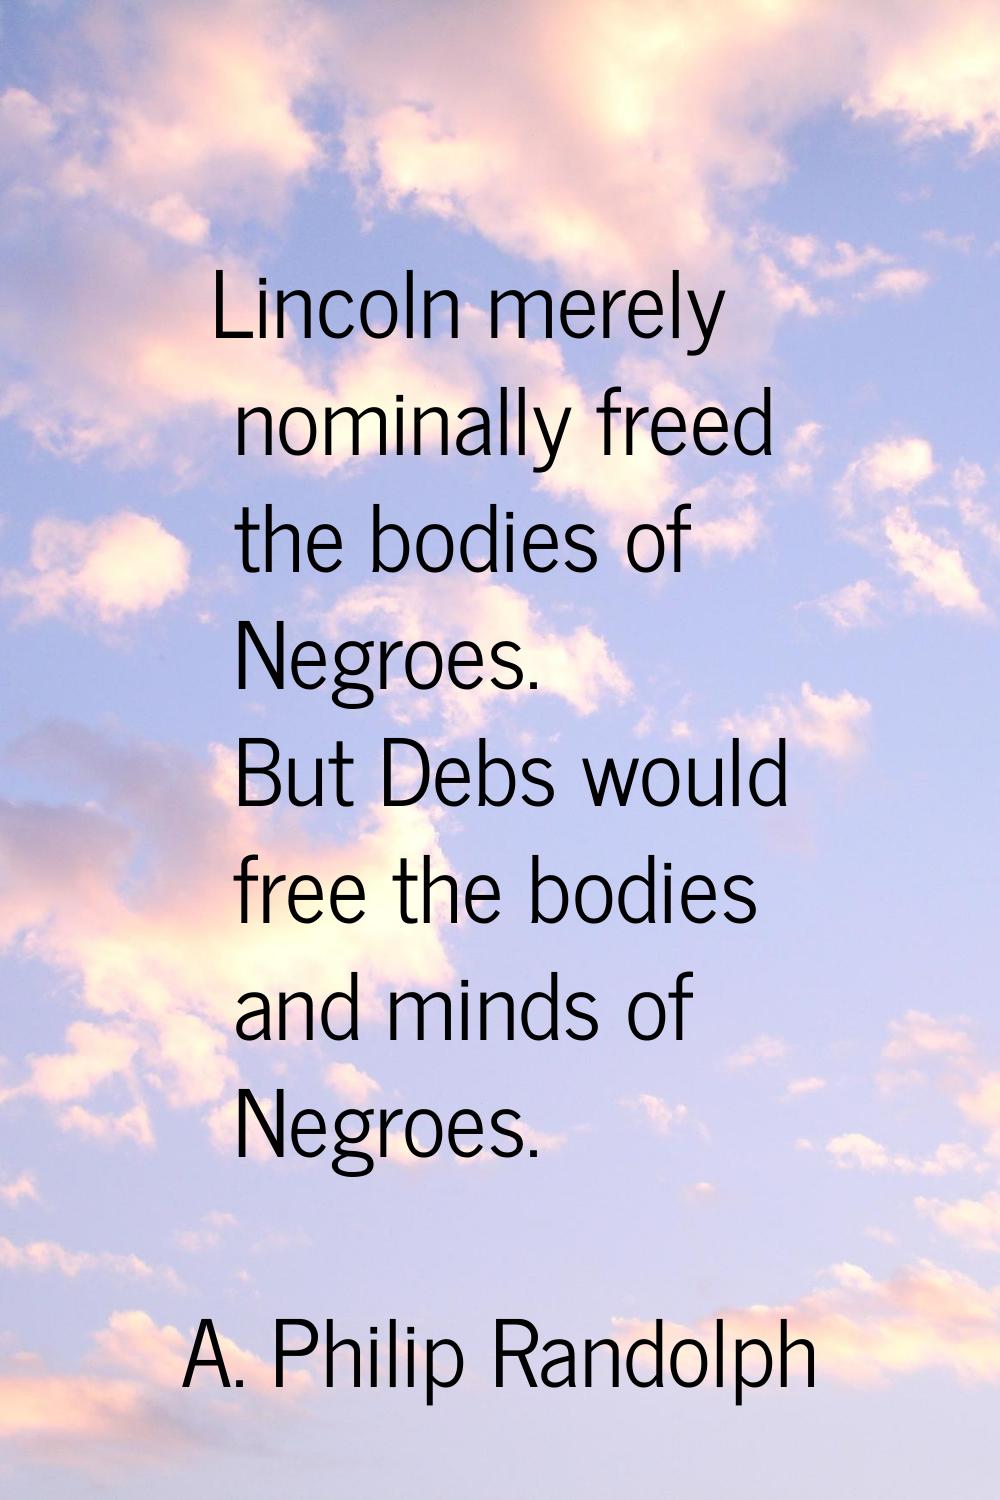 Lincoln merely nominally freed the bodies of Negroes. But Debs would free the bodies and minds of N